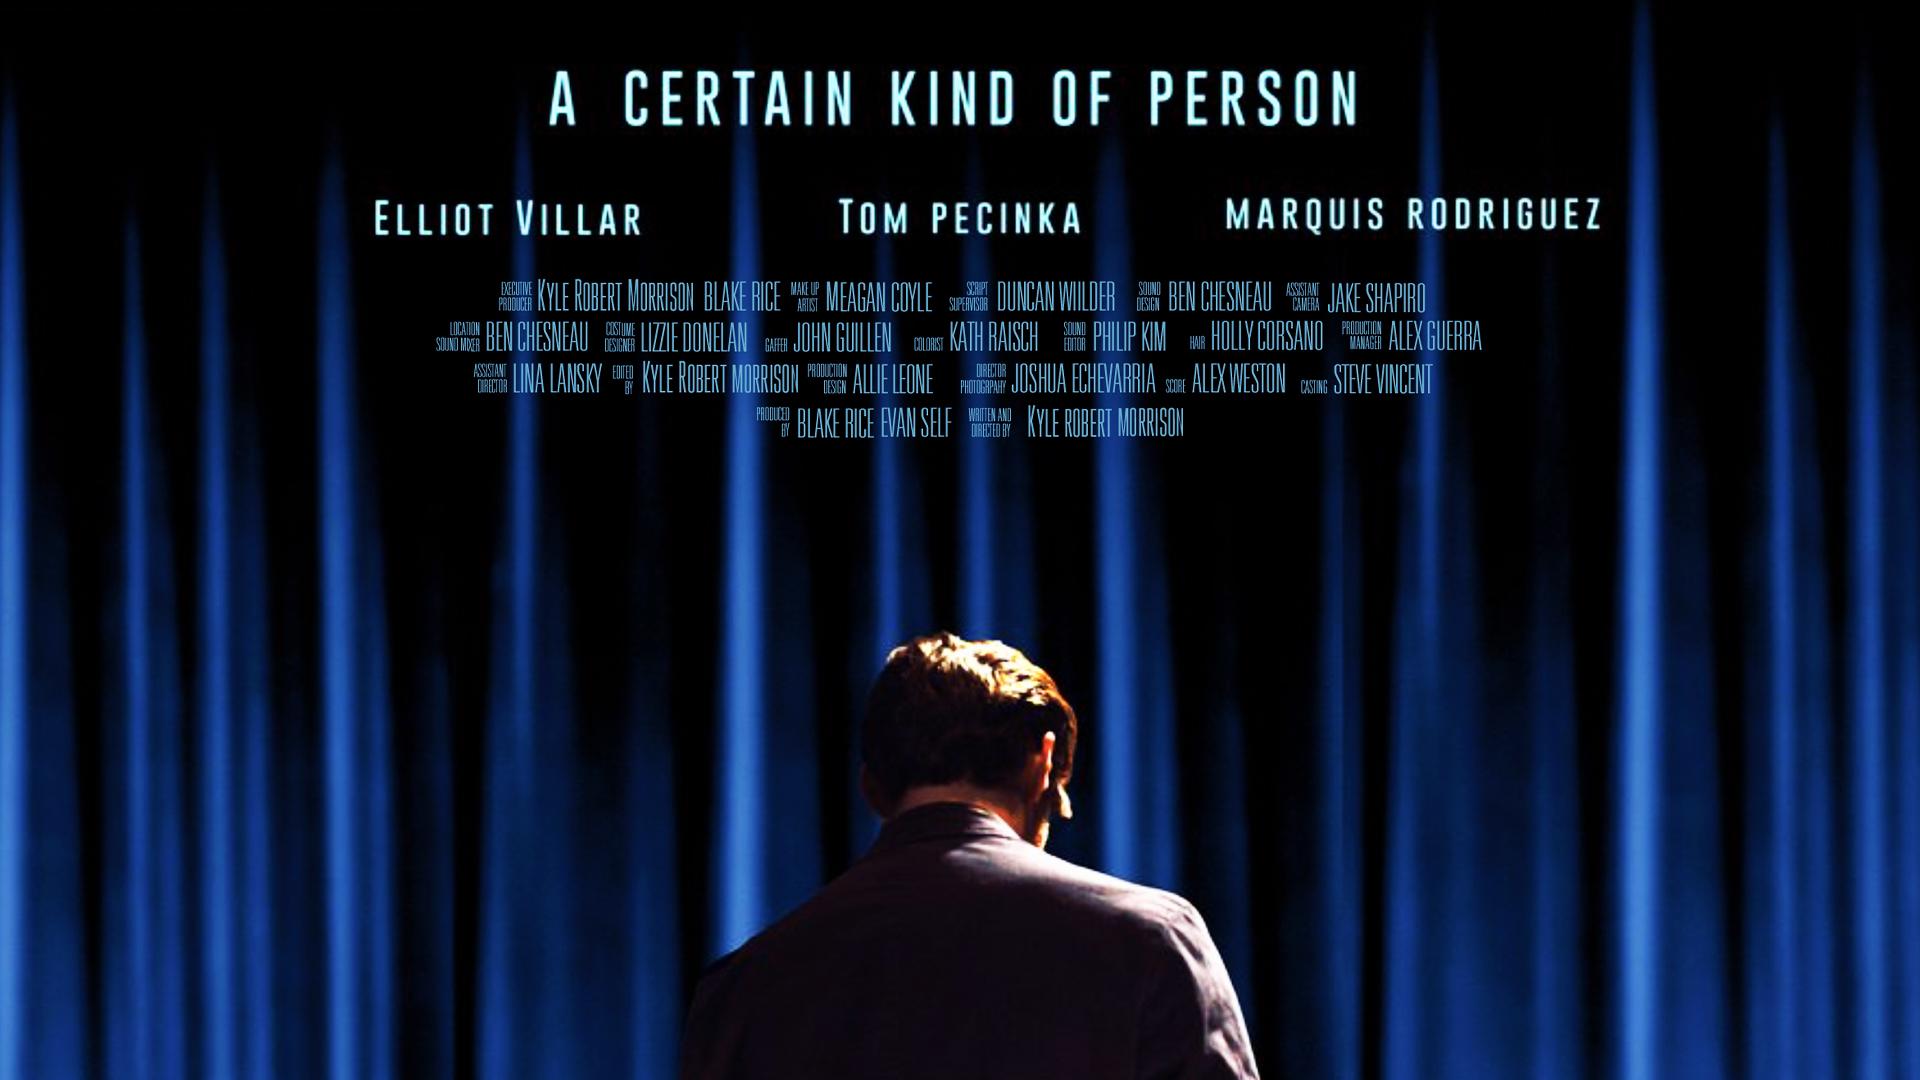 A Certain Kind of Person